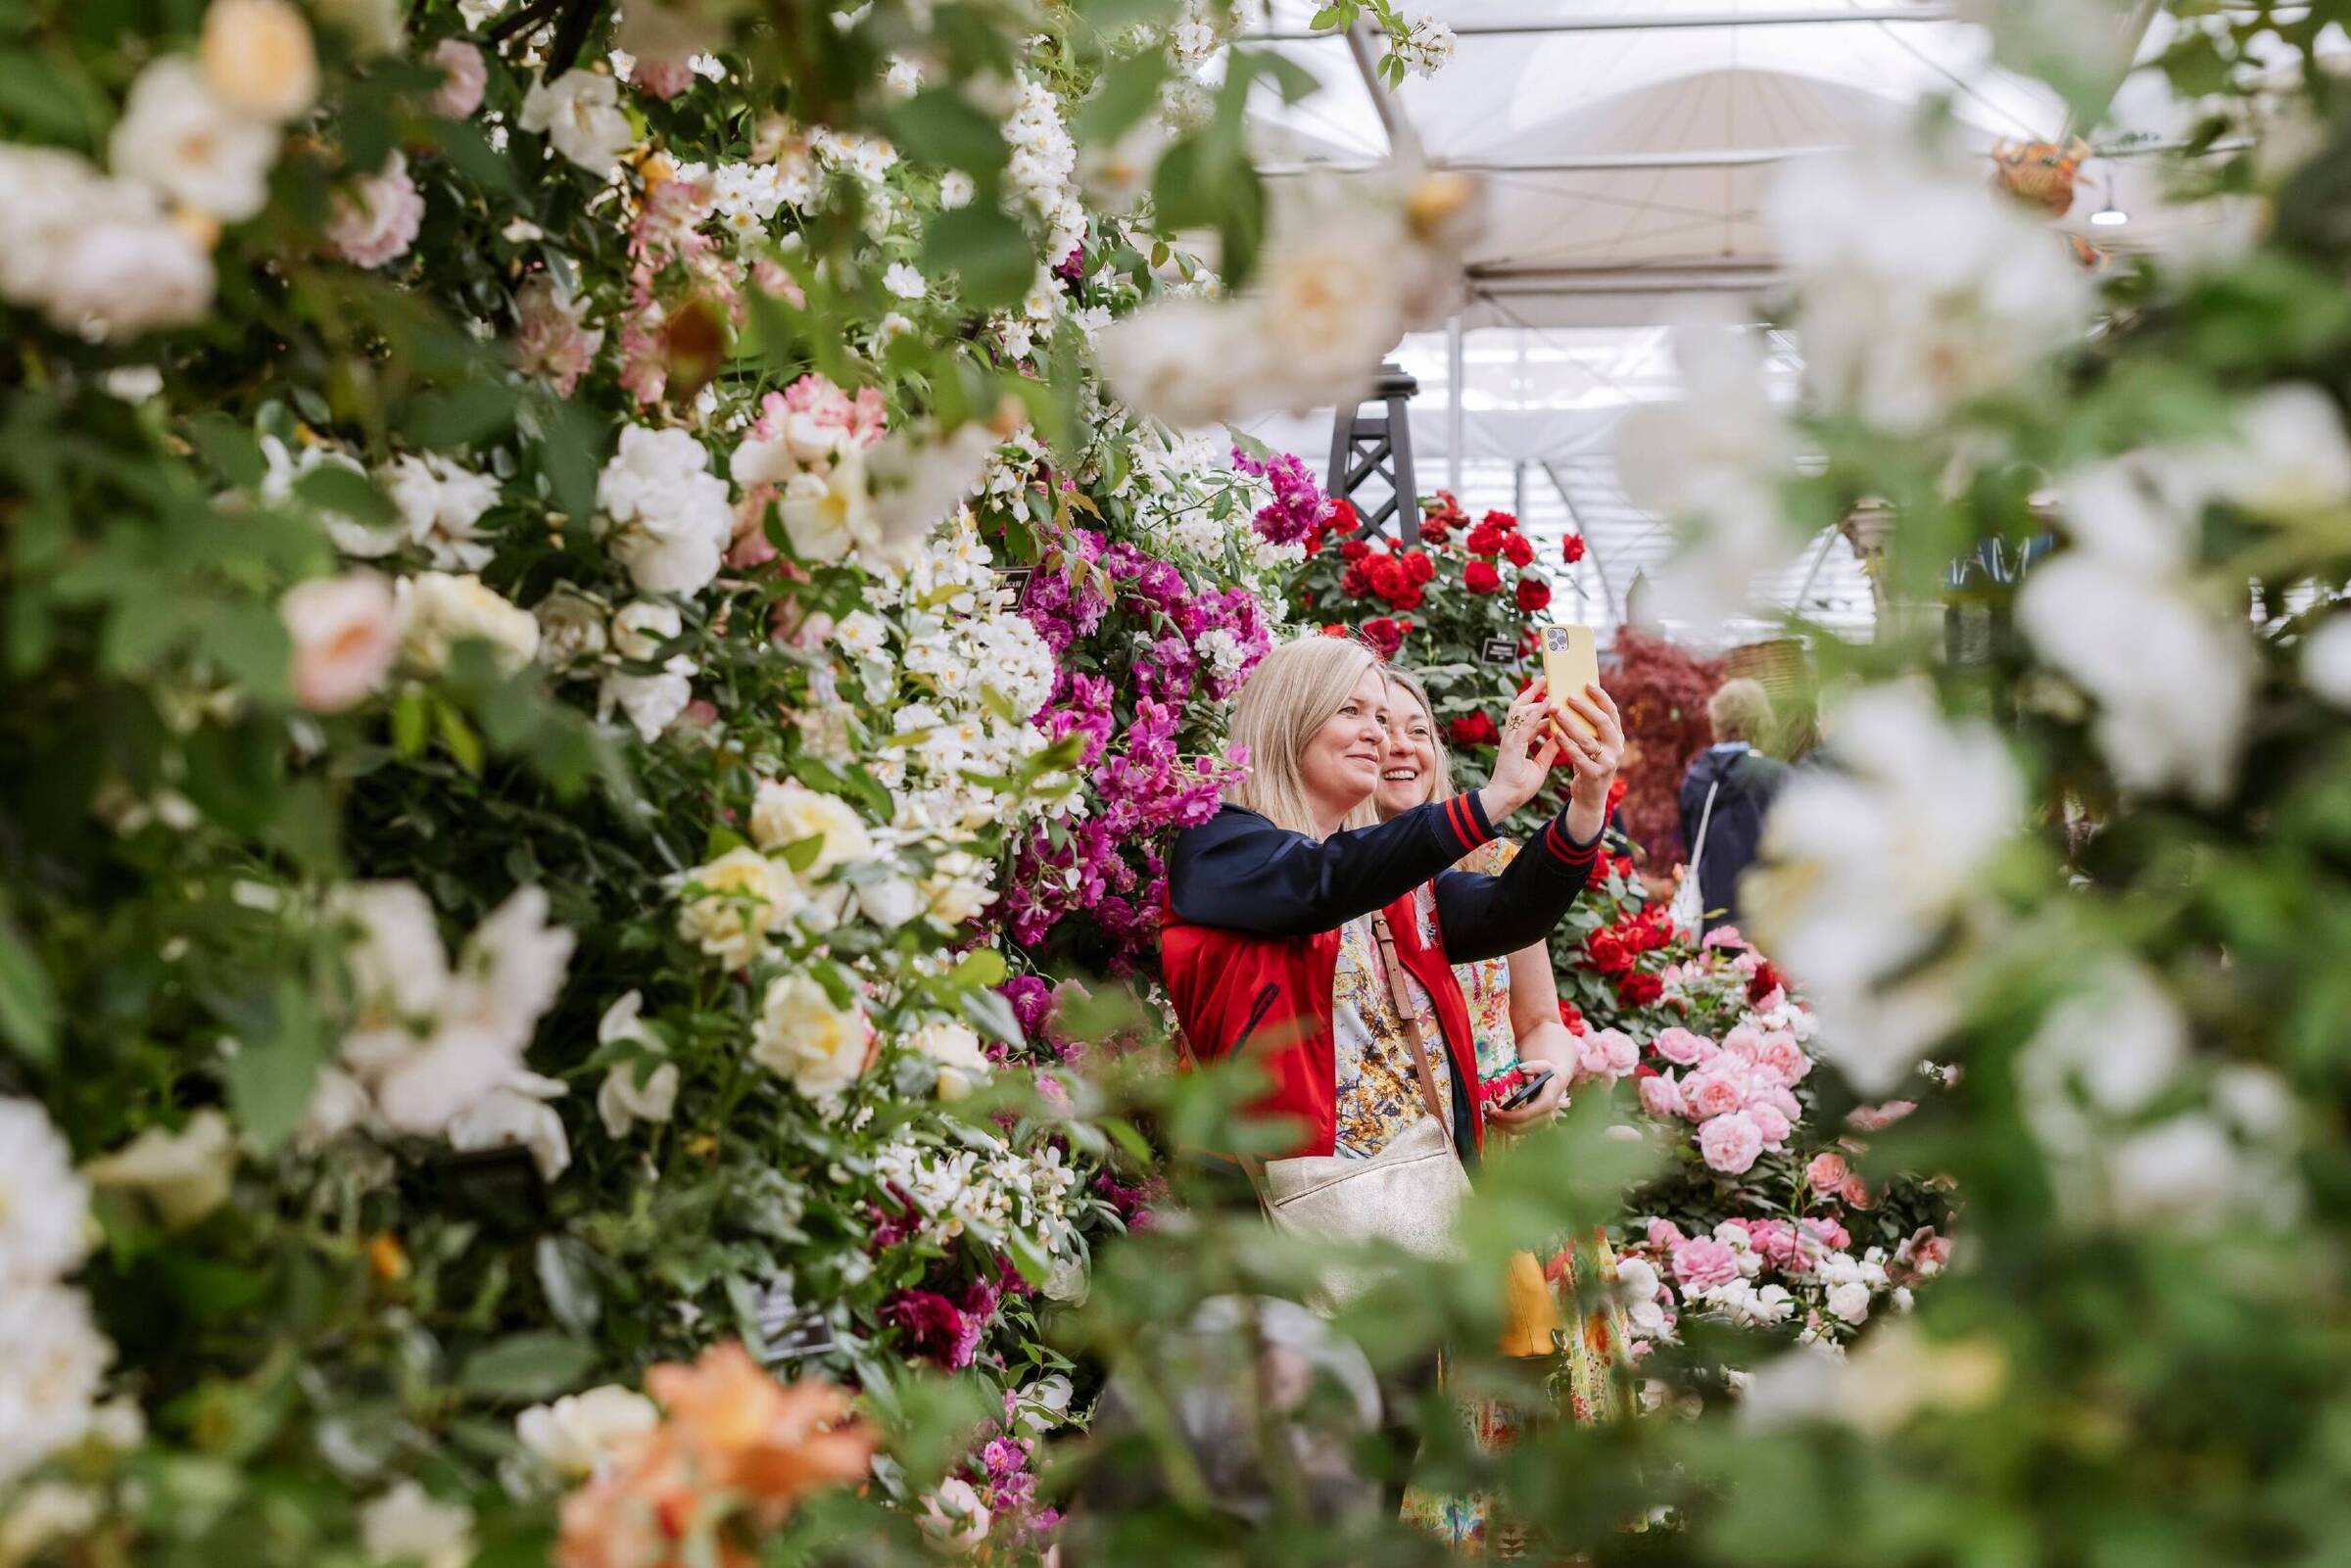 London is Blooming for The Chelsea Flower Show